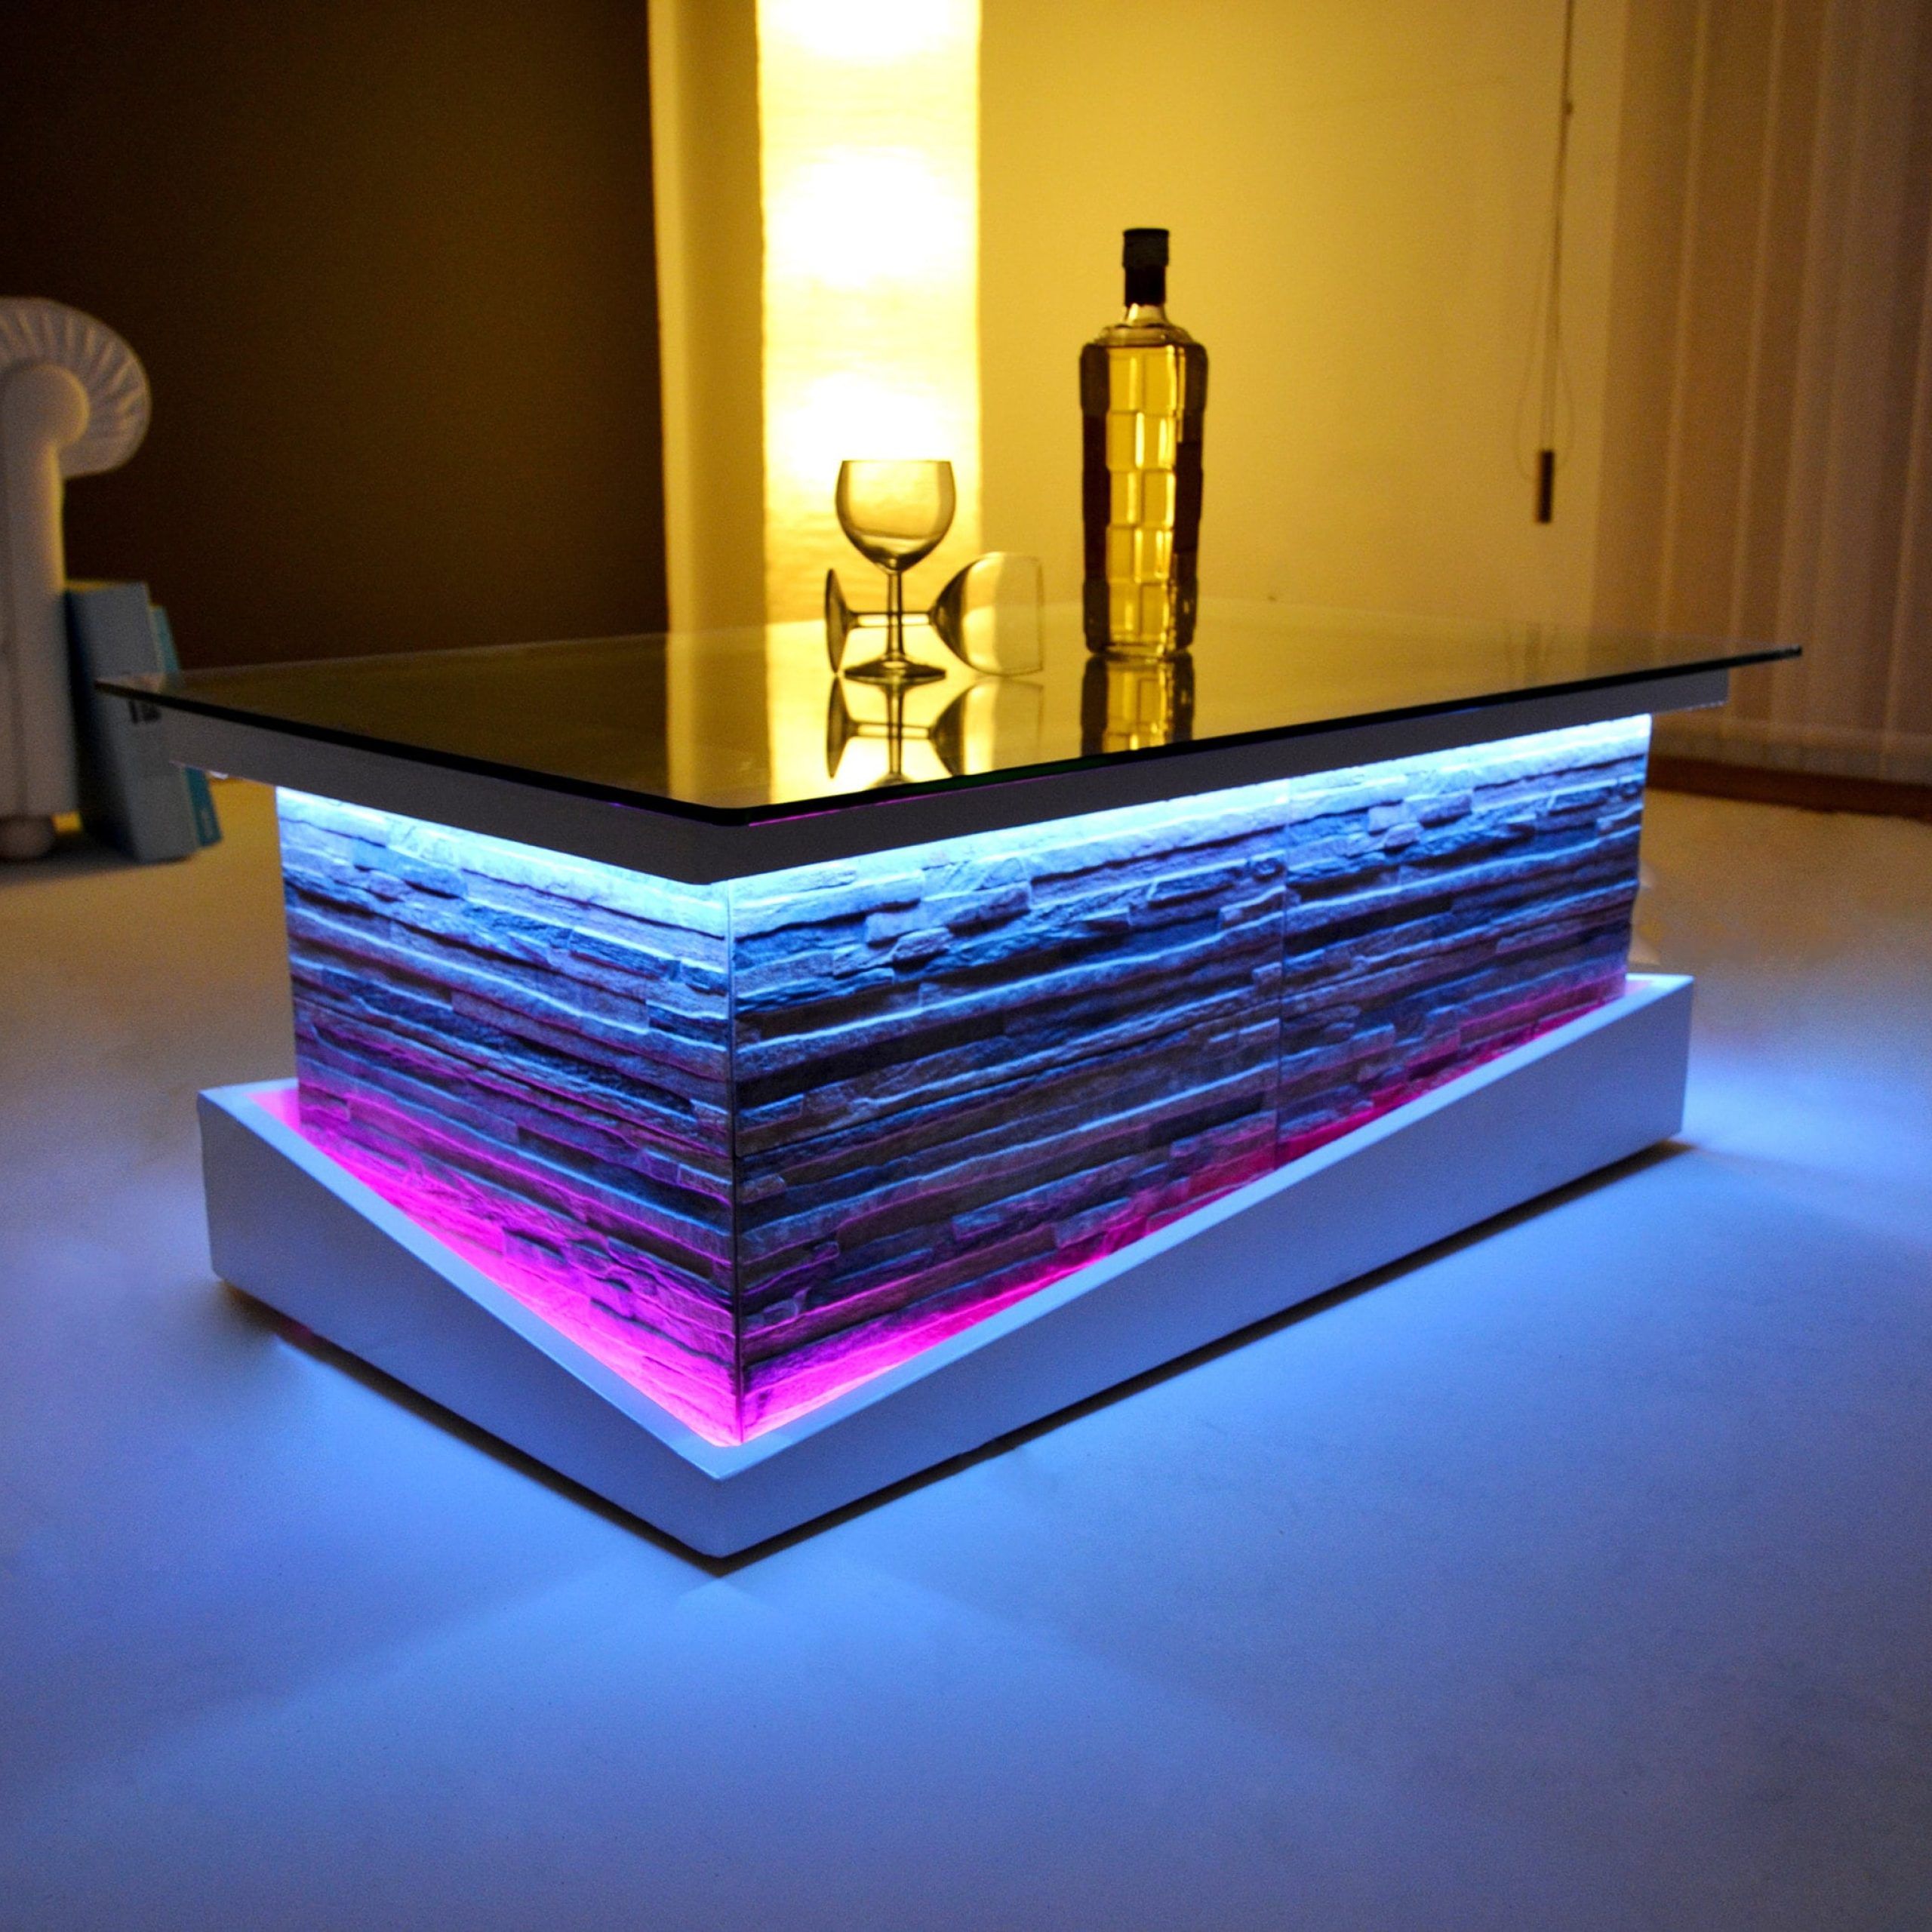 Fashionable Coffee Tables With Led Lights In Stone Model Coffee Table With Led Lights Glass Top – Etsy Finland (Photo 2 of 10)